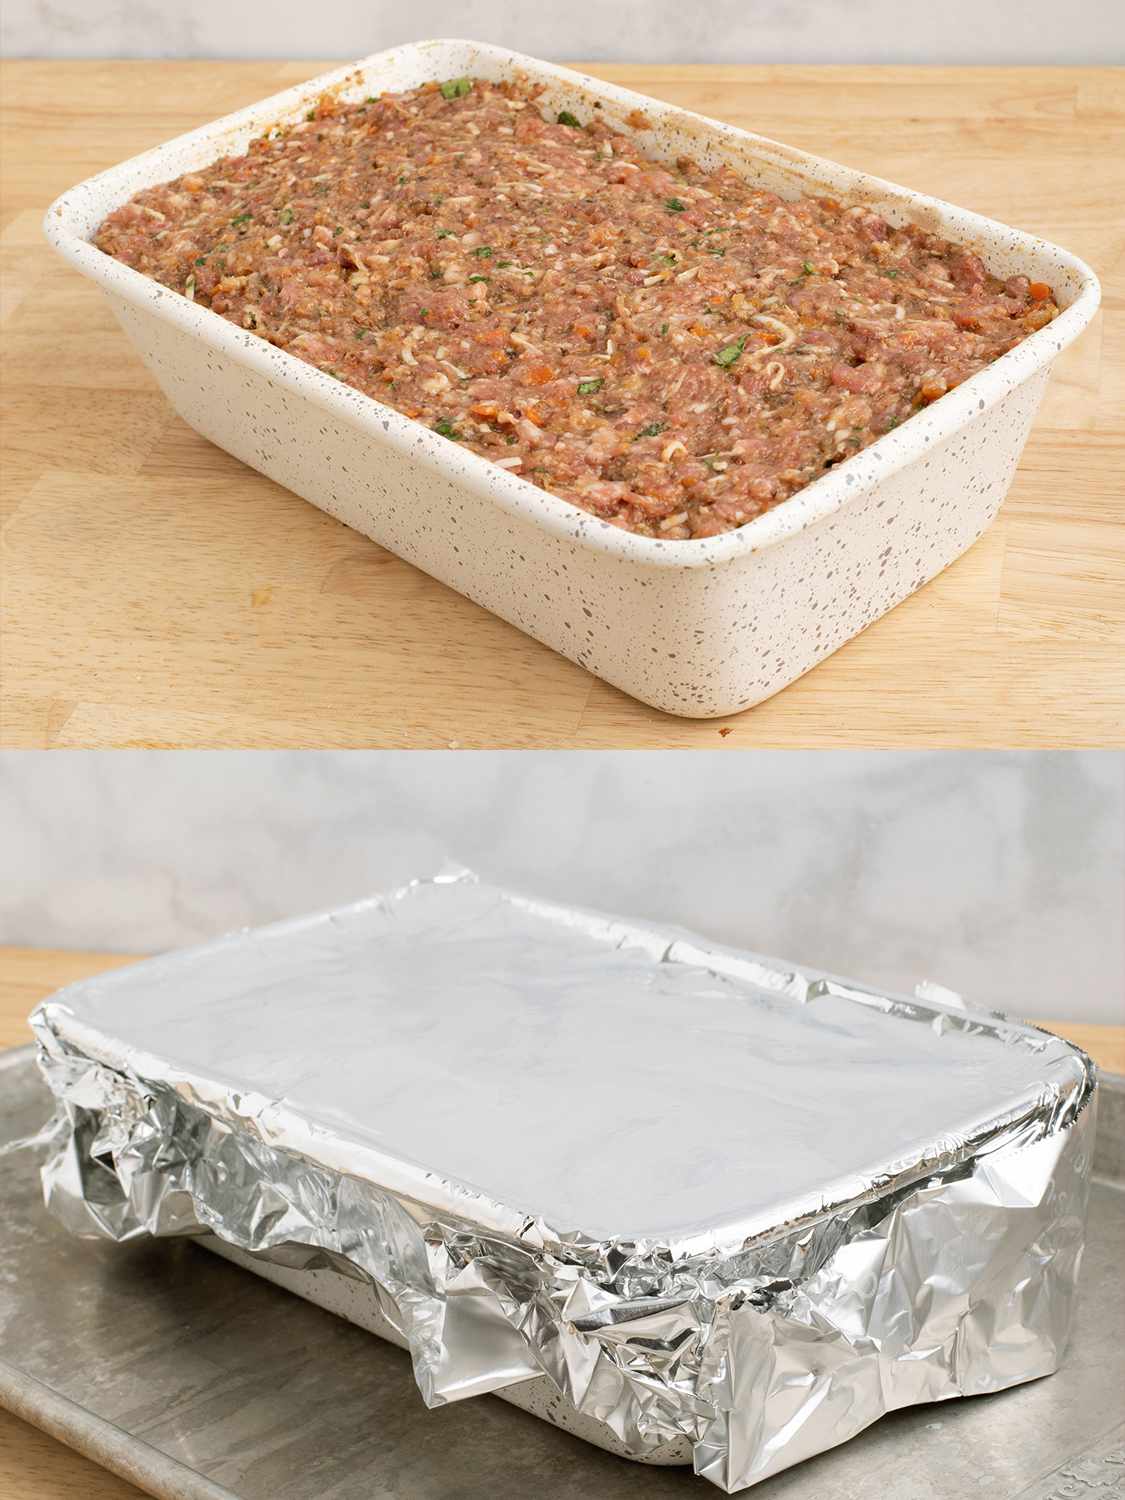 Meatloaf mixture in a baking dish, then covered with foil